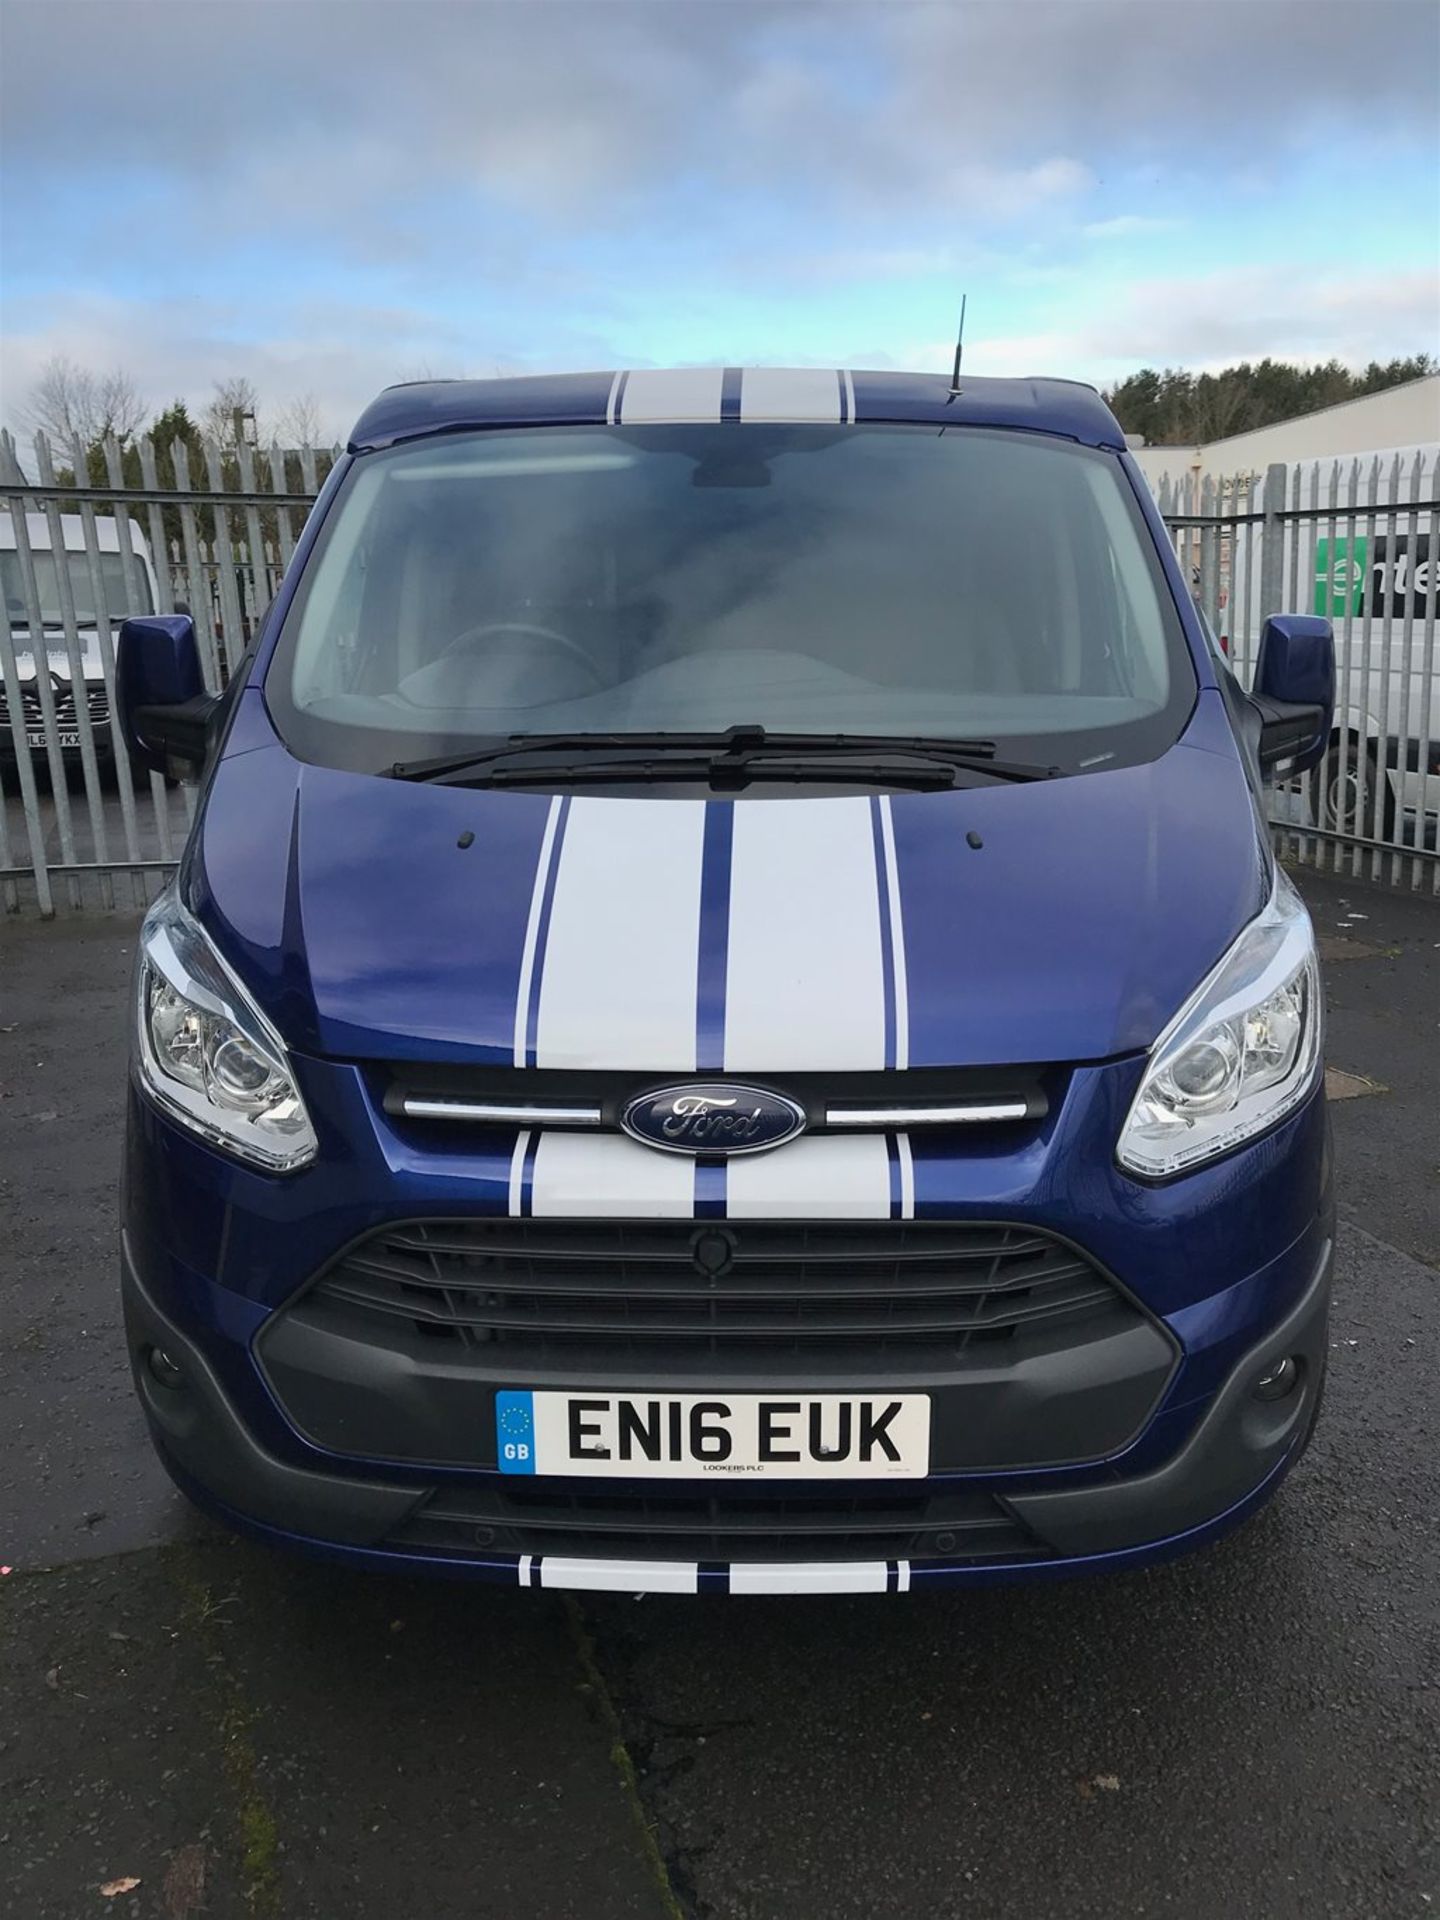 Ford Transit Custom 2.2 125ps 290 Limited E-Tech Camper Conversion - Image 2 of 10